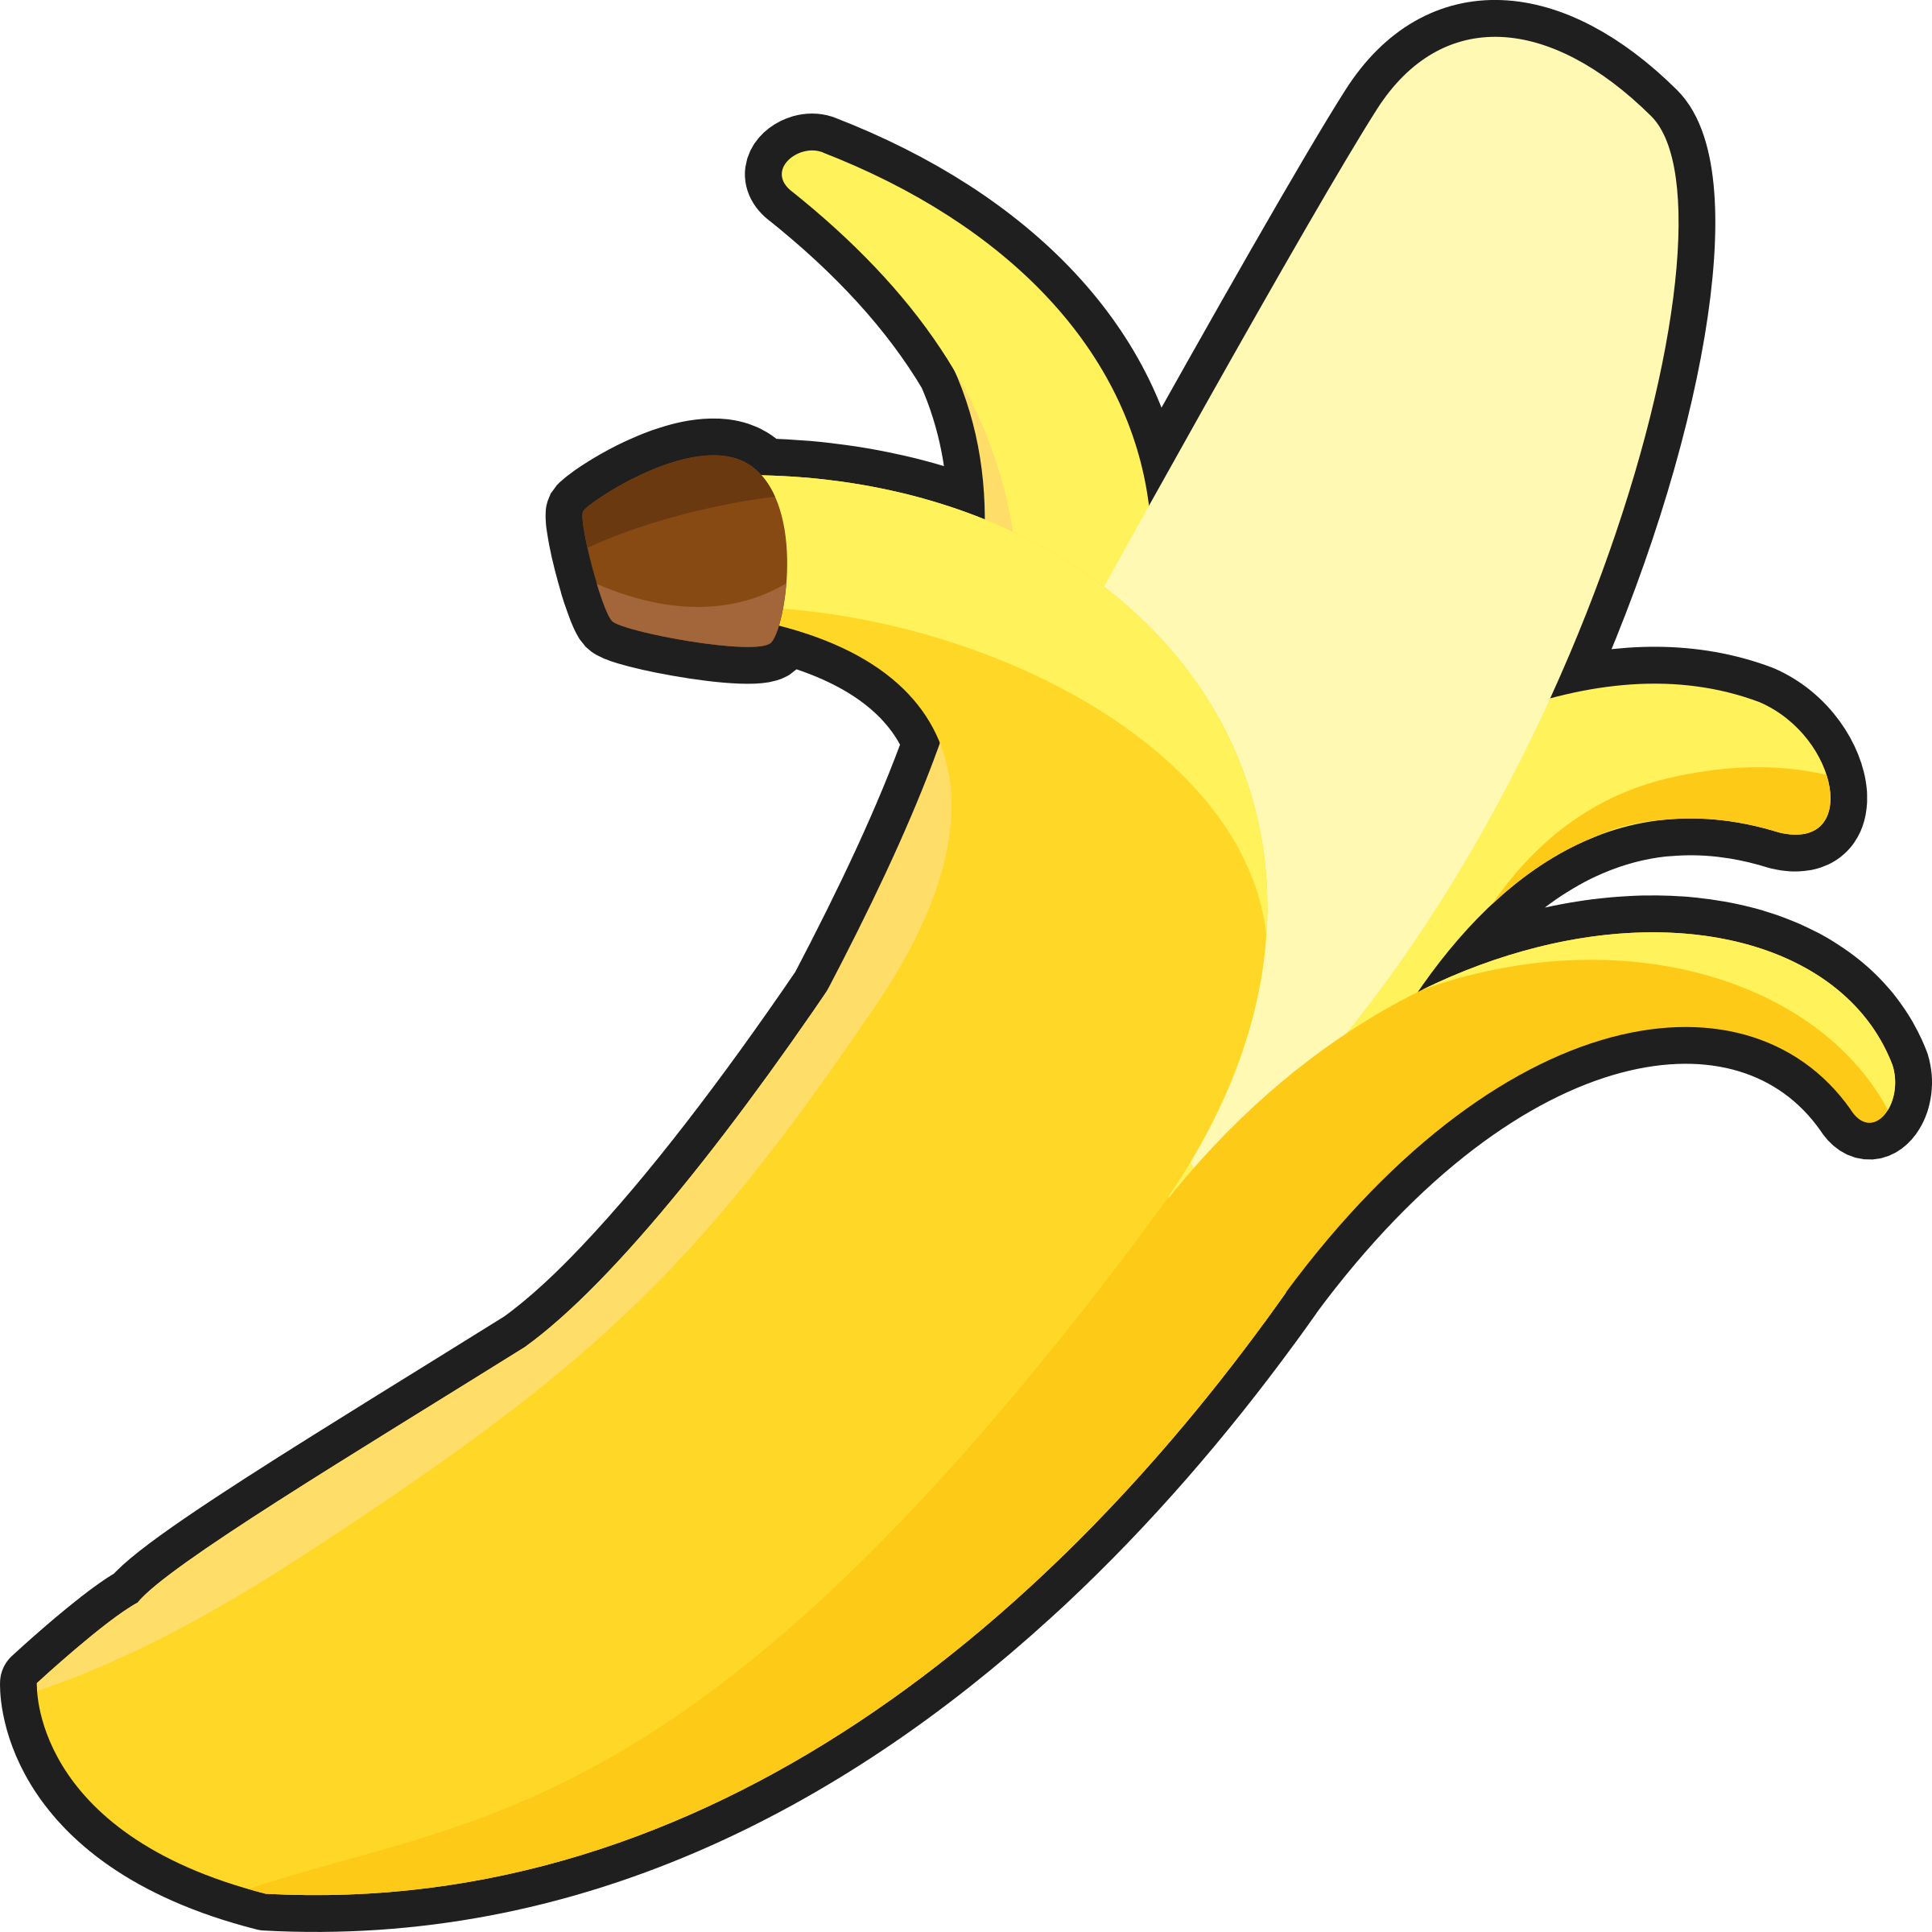 Add Some Flavor to Your Designs with Banana Clip Art